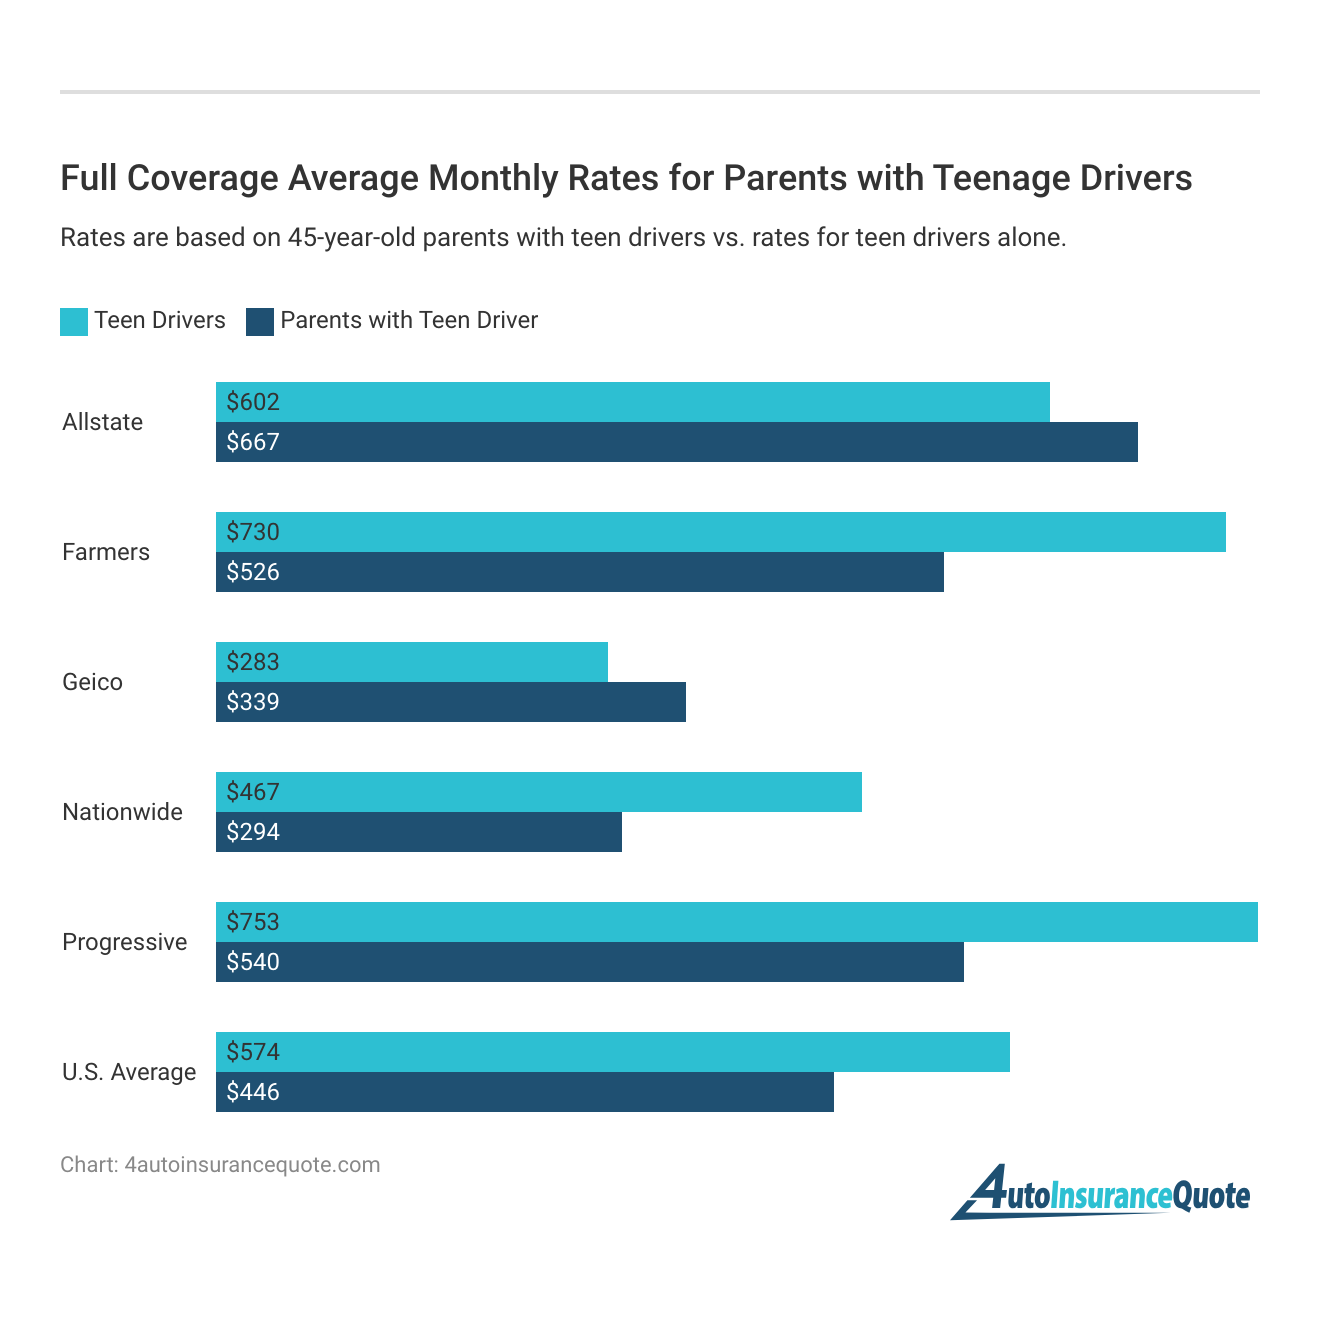 <h3>Full Coverage Average Monthly Rates for Parents with Teenage Drivers</h3>